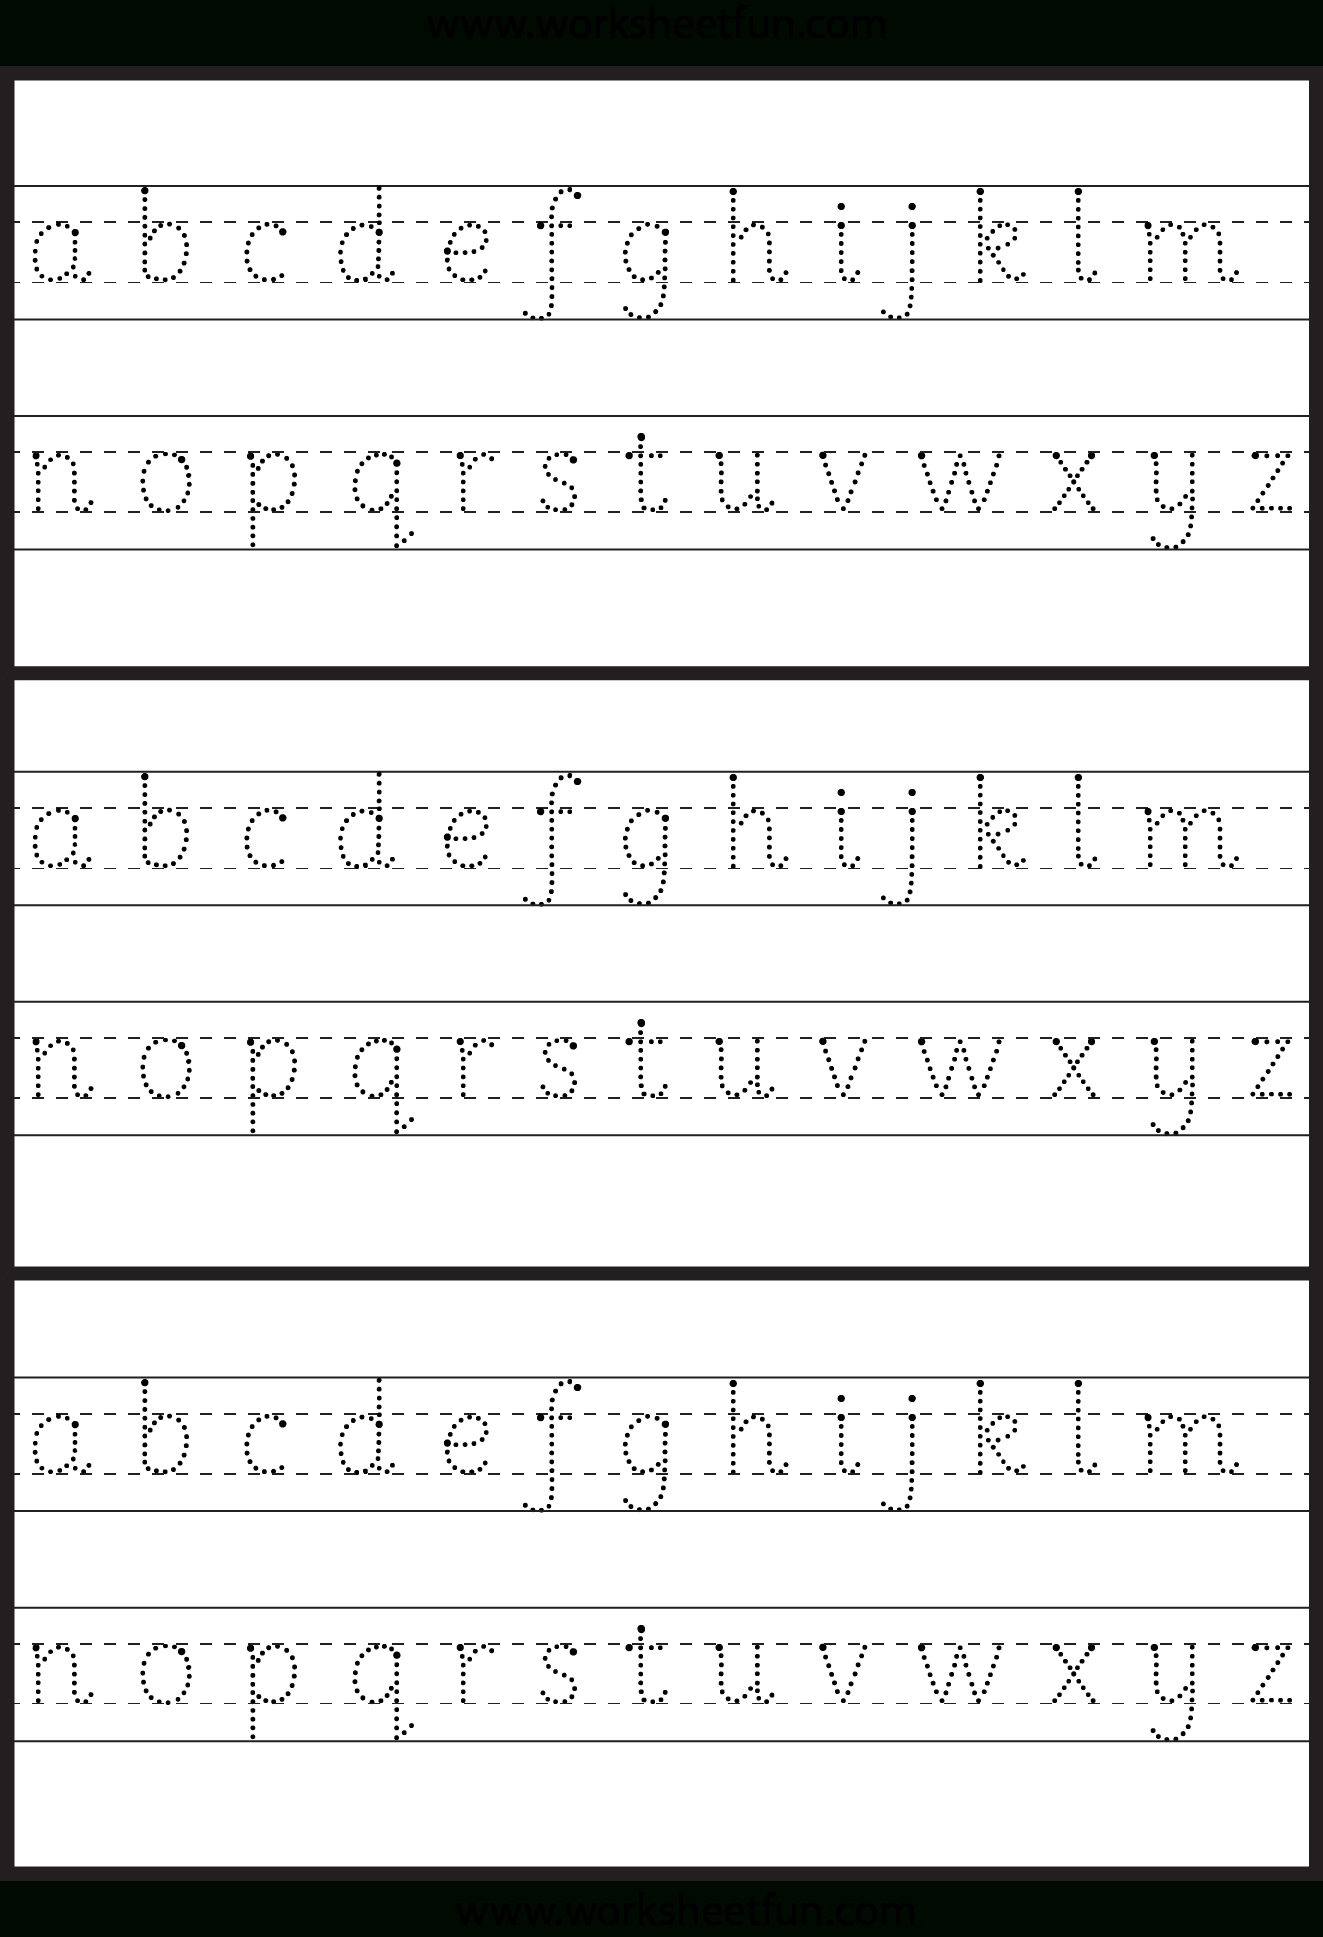 Lowercase/ Small Letter Tracing Worksheet | Letter Tracing intended for Alphabet Tracing Worksheet Small Letters